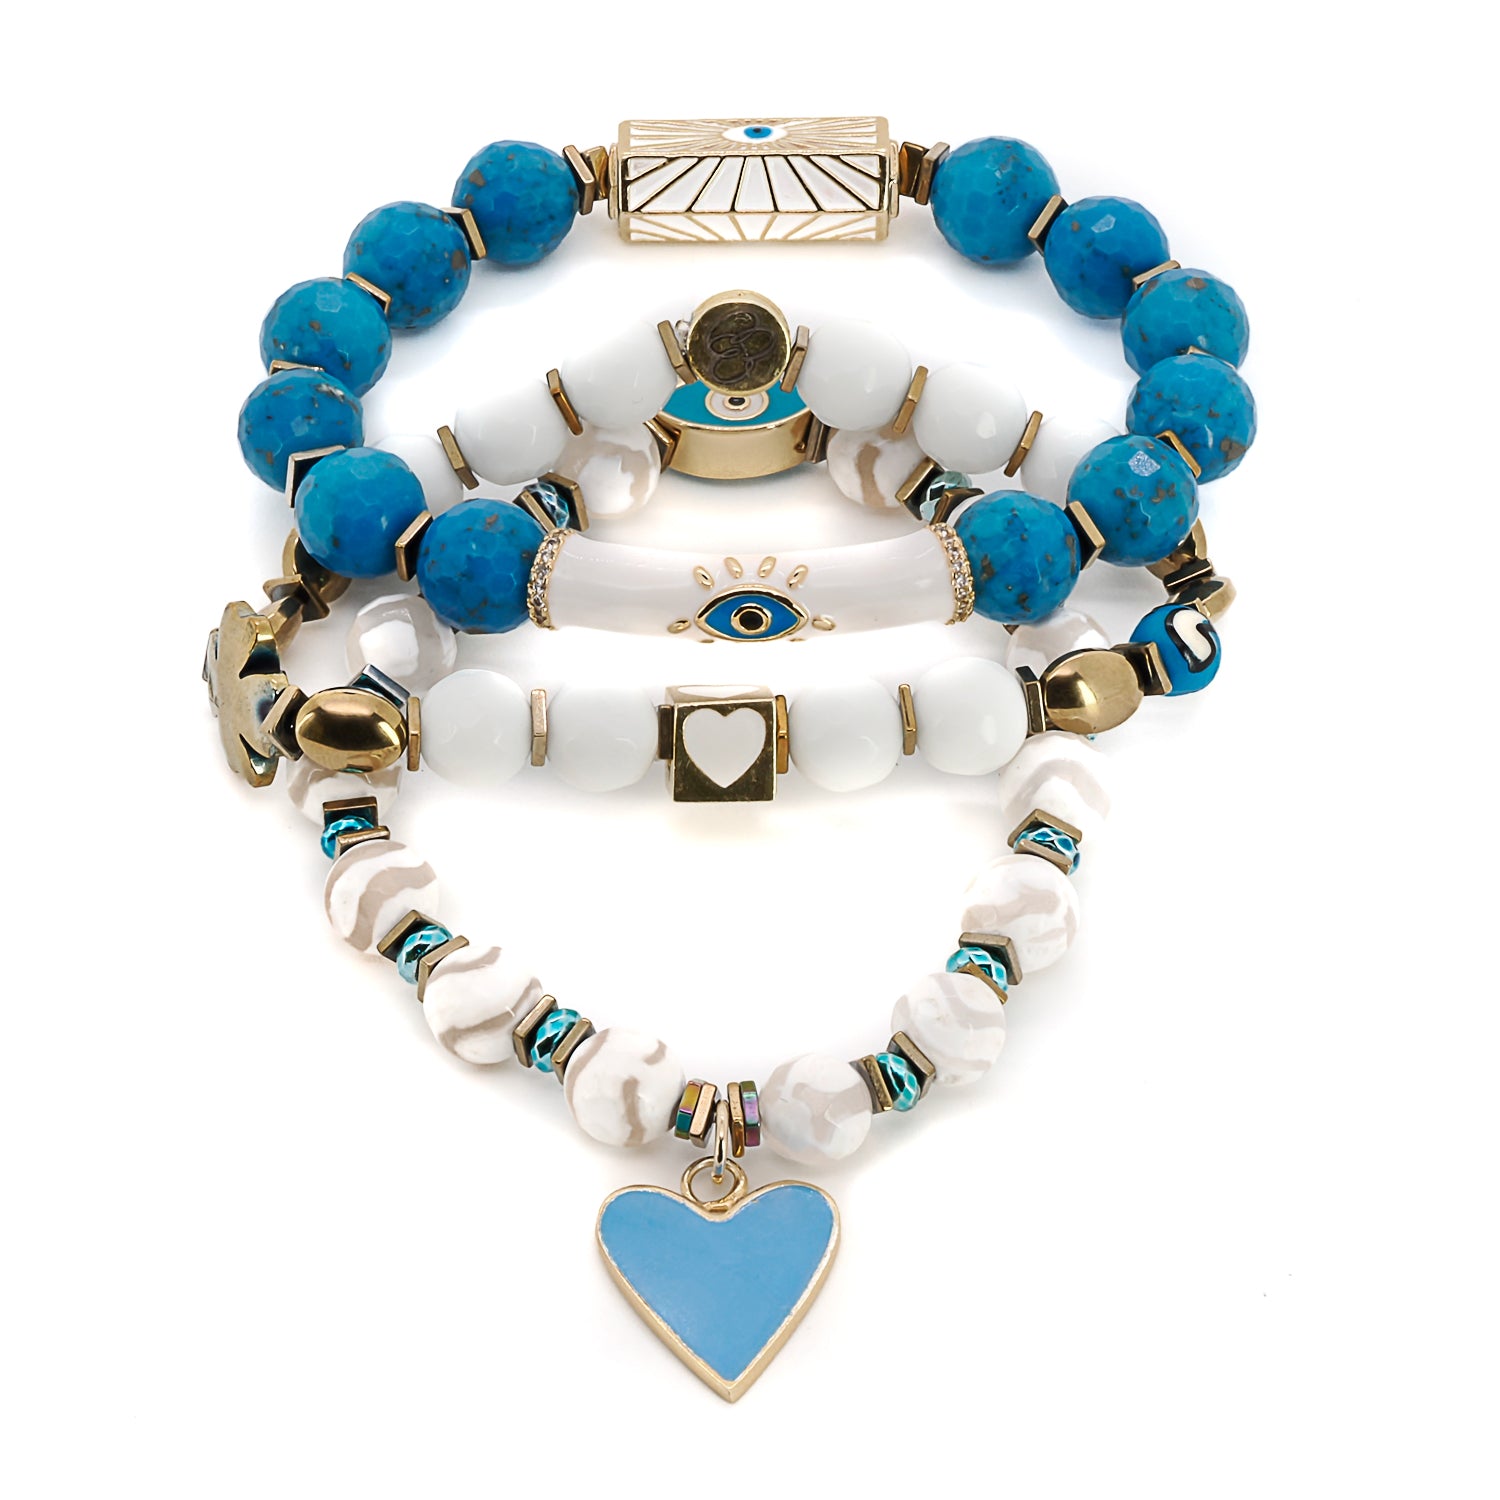 Embrace the energy of love and protection with the Power Of Love Trio Bracelet Set, adorned with a blue enamel heart charm and evil eye bead.